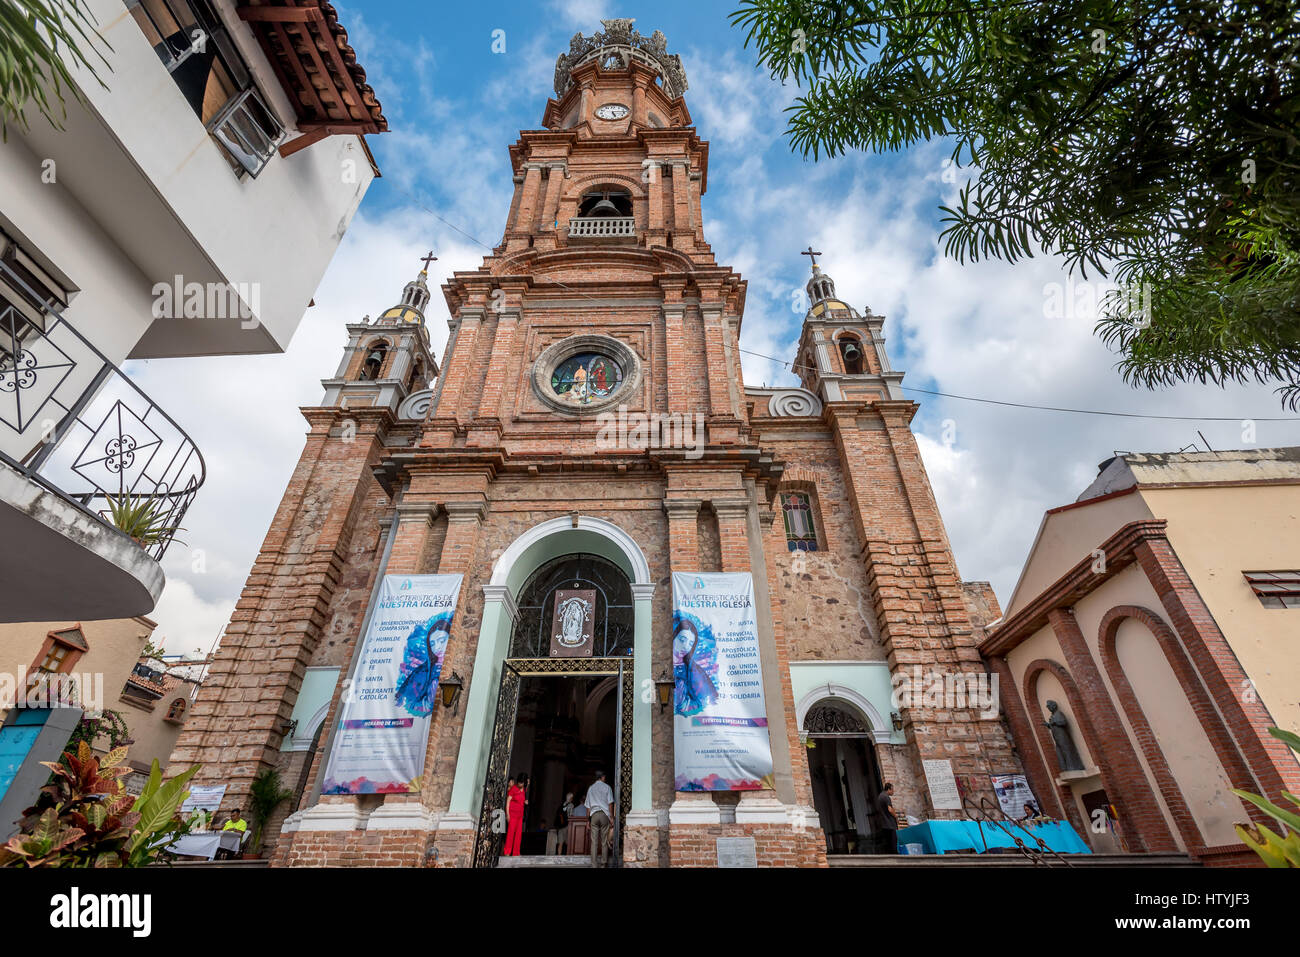 Looking up at the Puerto Vallarta church Our Lady of Guadalupe from close up with wide angle lens and full corners, lady in red standing in  doorway. Stock Photo